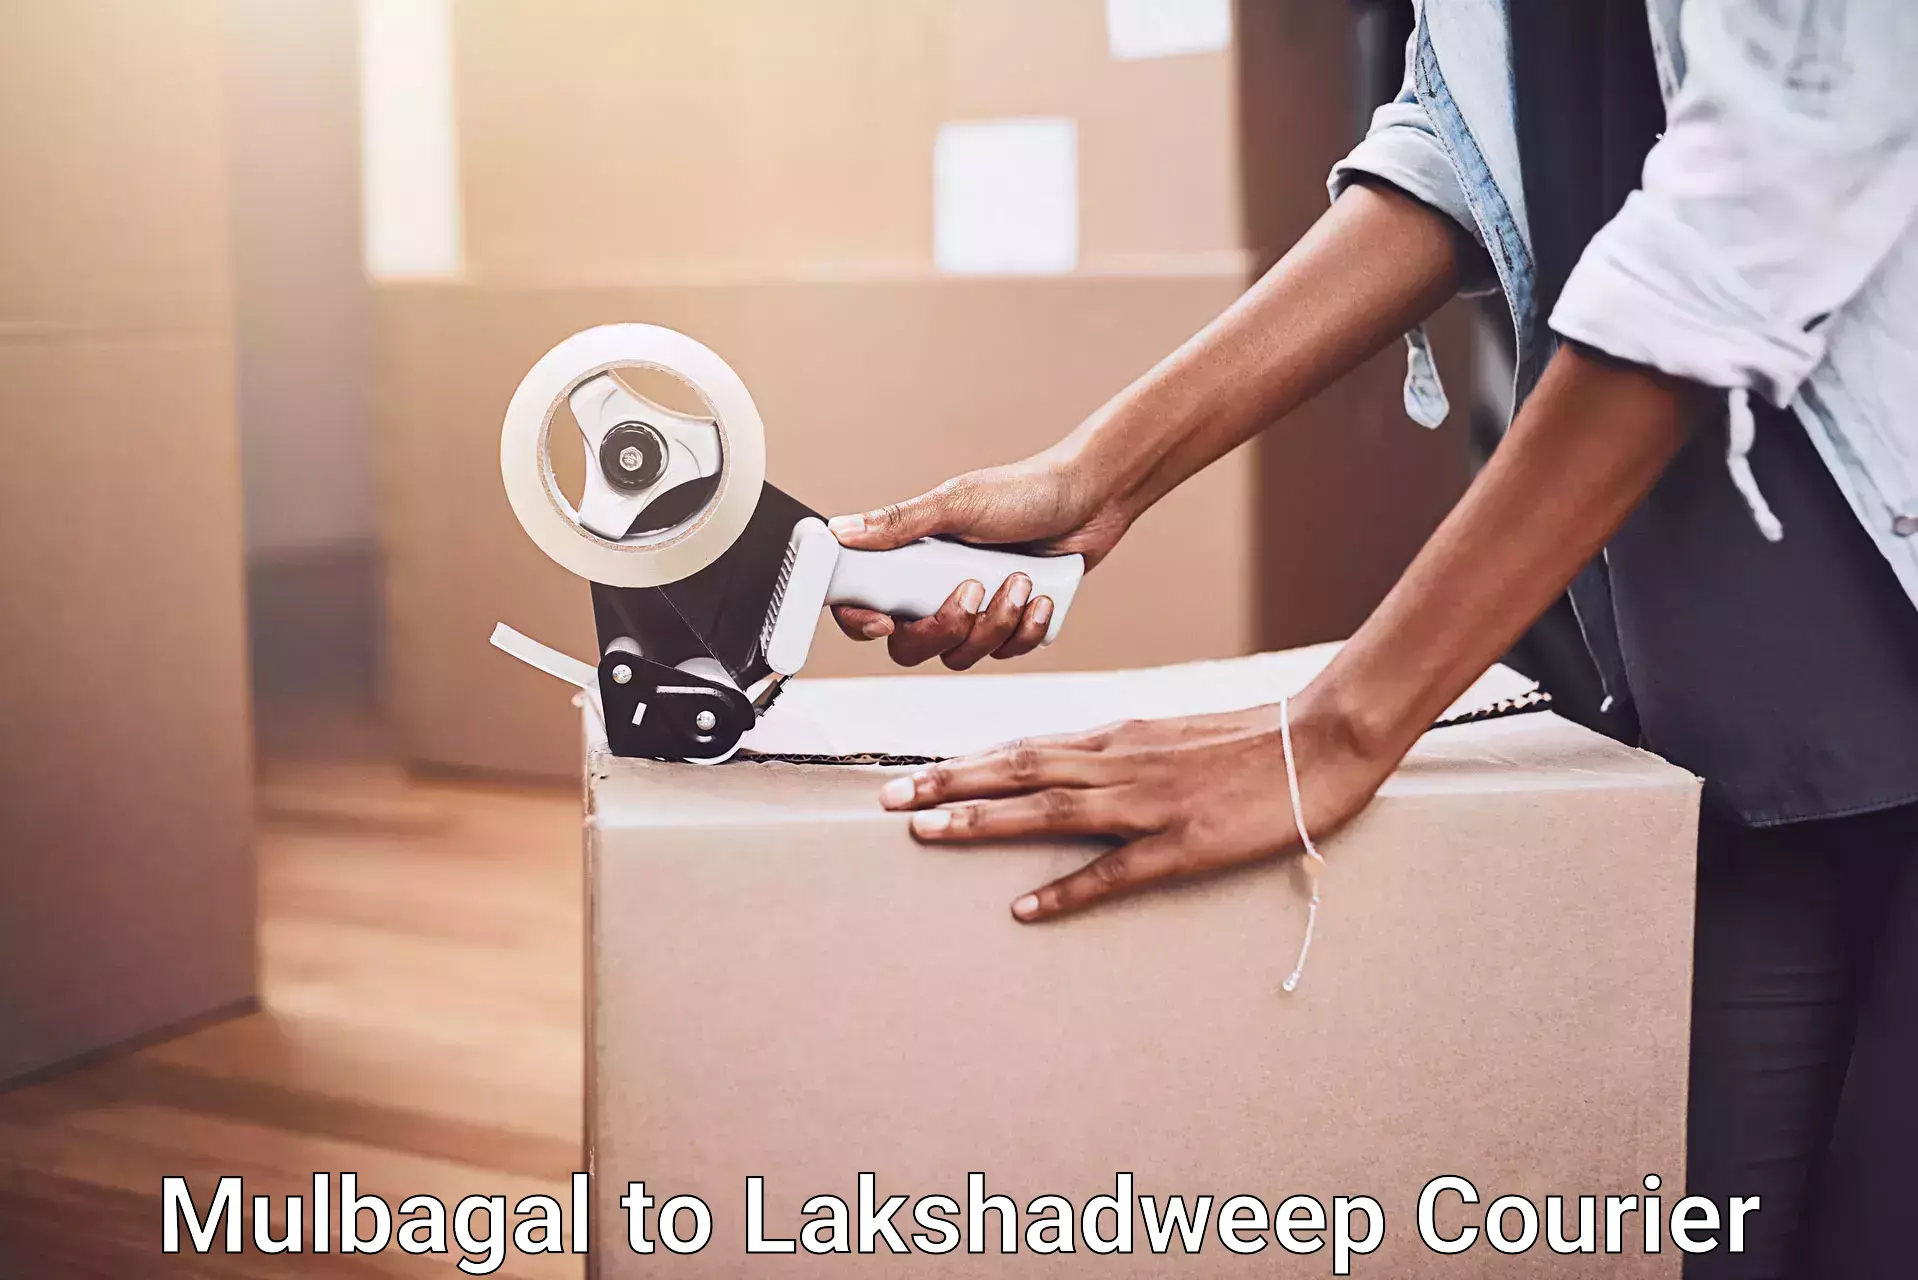 Trusted moving company in Mulbagal to Lakshadweep